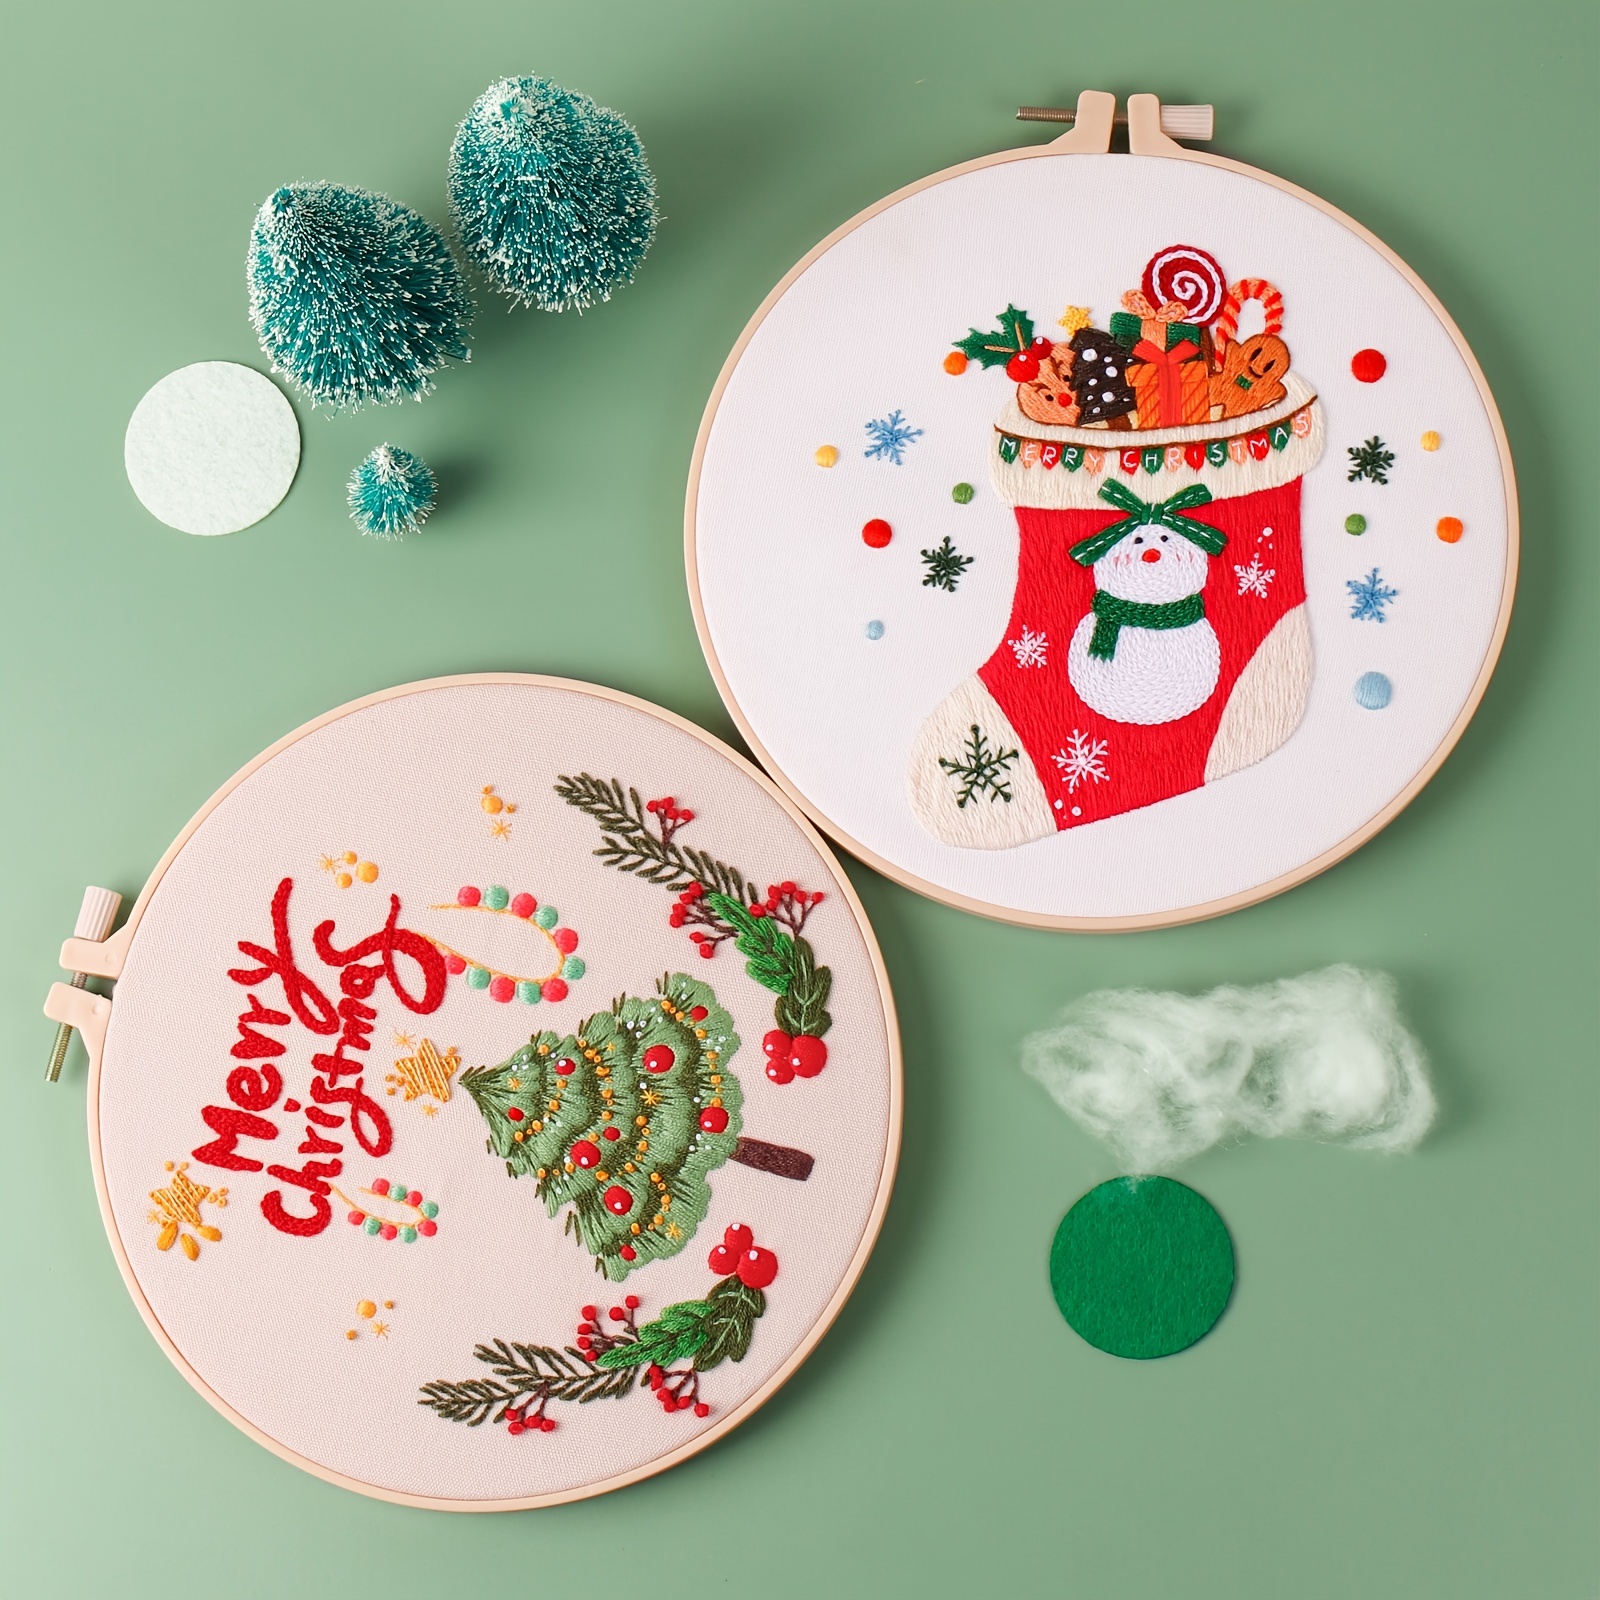 Merry Christmas Embroidery Kit - 390191999